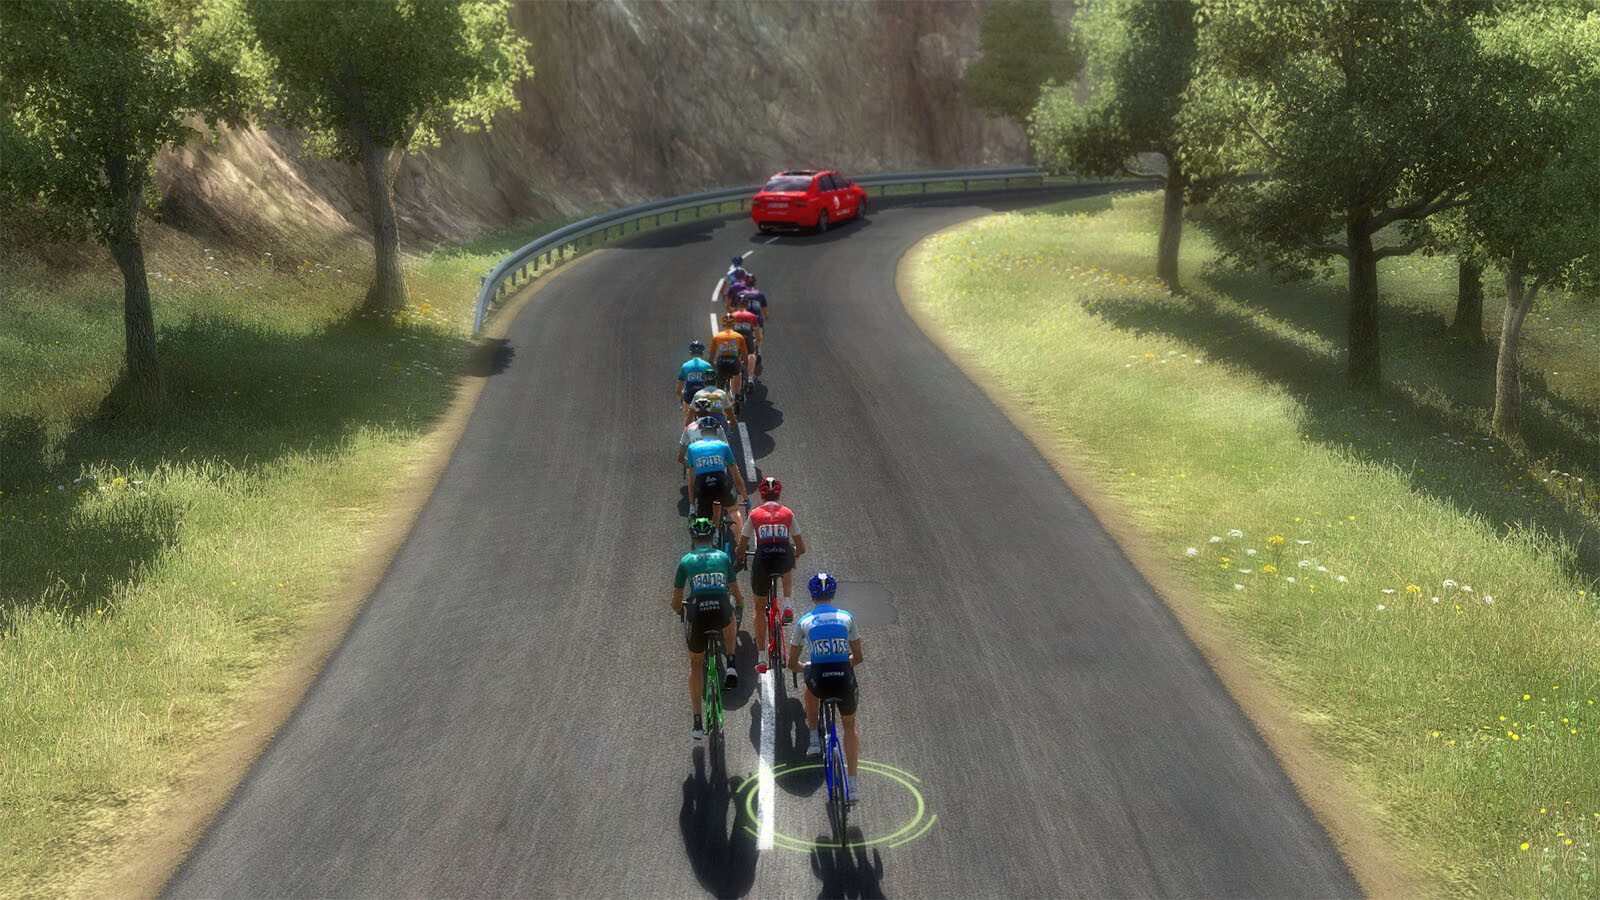 Pro Cycling Manager 2022 Steam Key for PC - Buy now